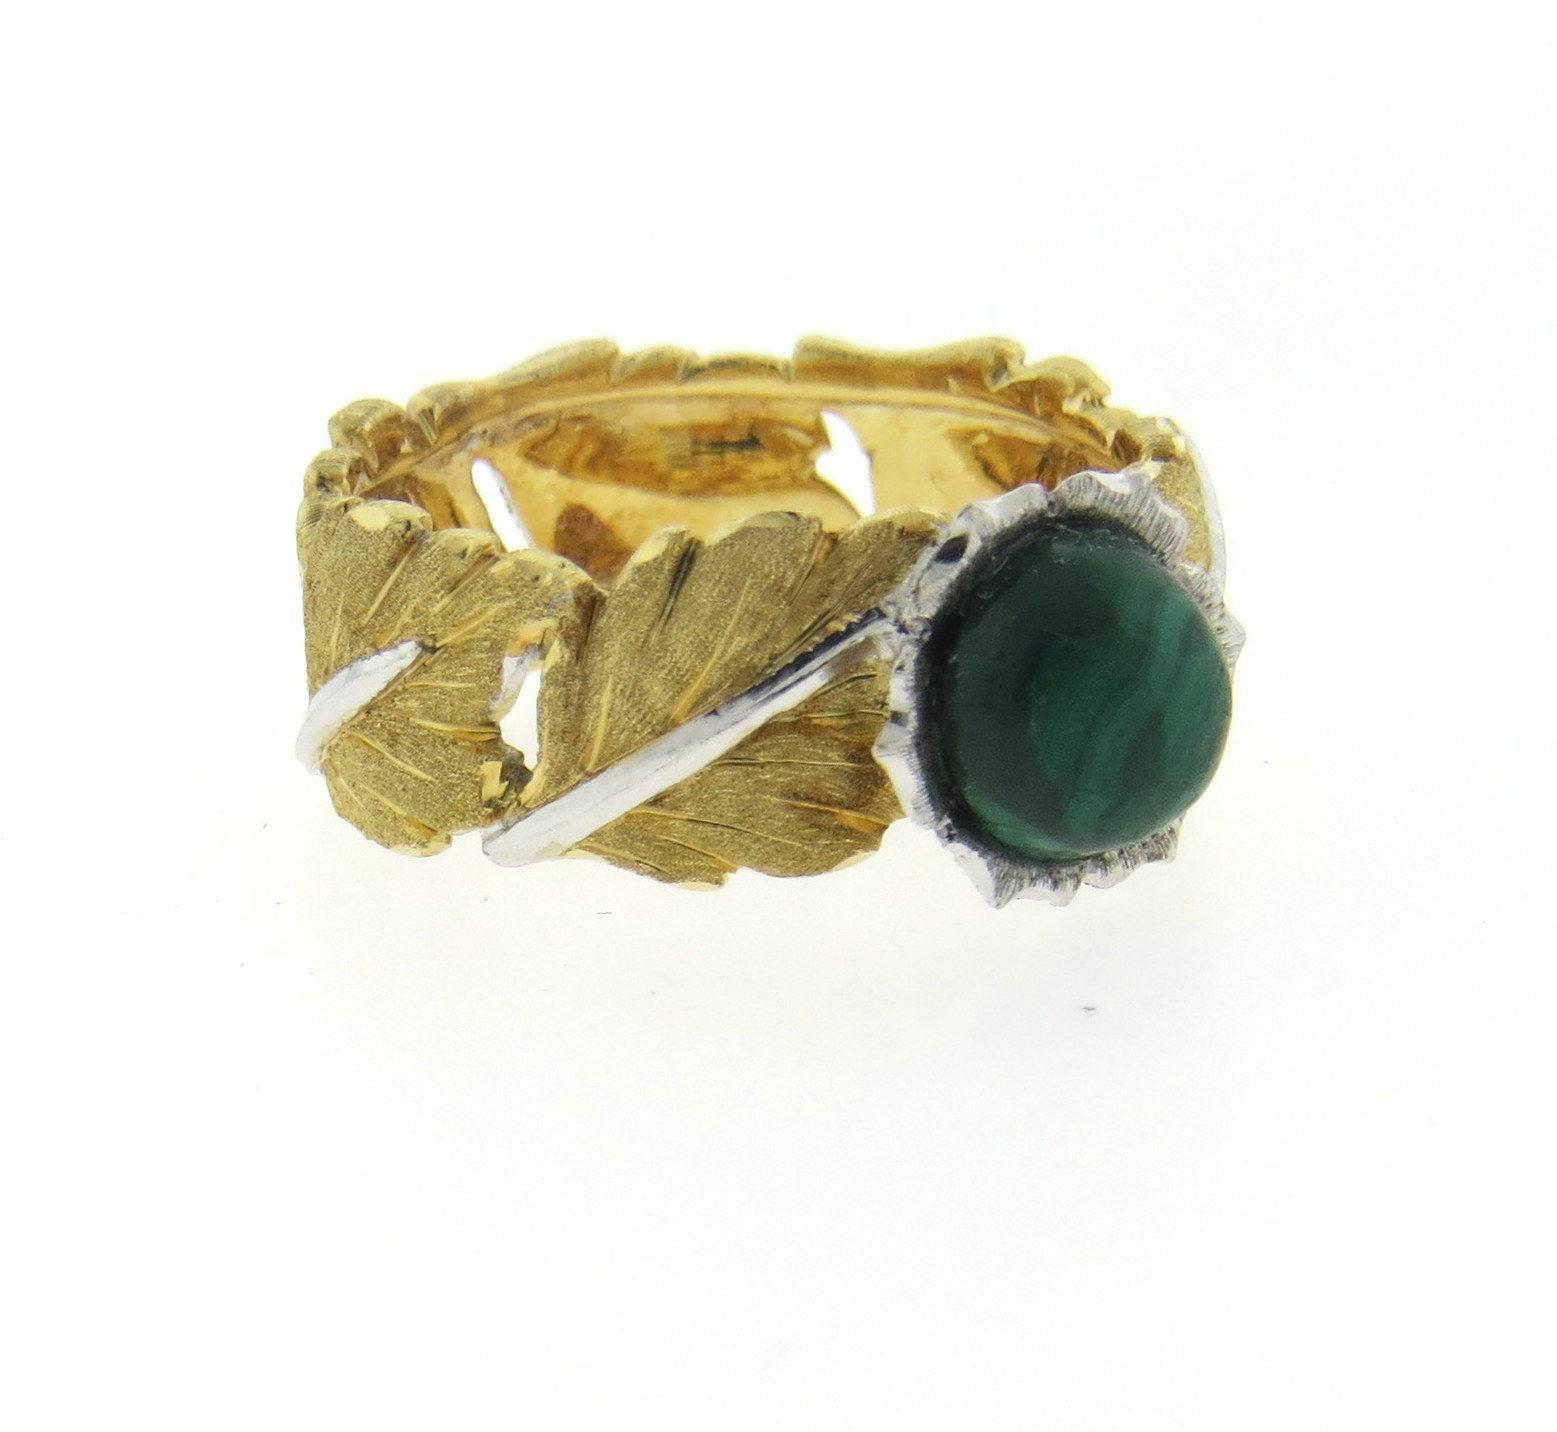 An 18k yellow and white gold ring set with a 7mm malachite cabochon. Crafted by Buccellati, the ring is a size 7 and 8.4mm wide. The weight of the ring is 7.2 grams.  Marked: Buccellati, 750
